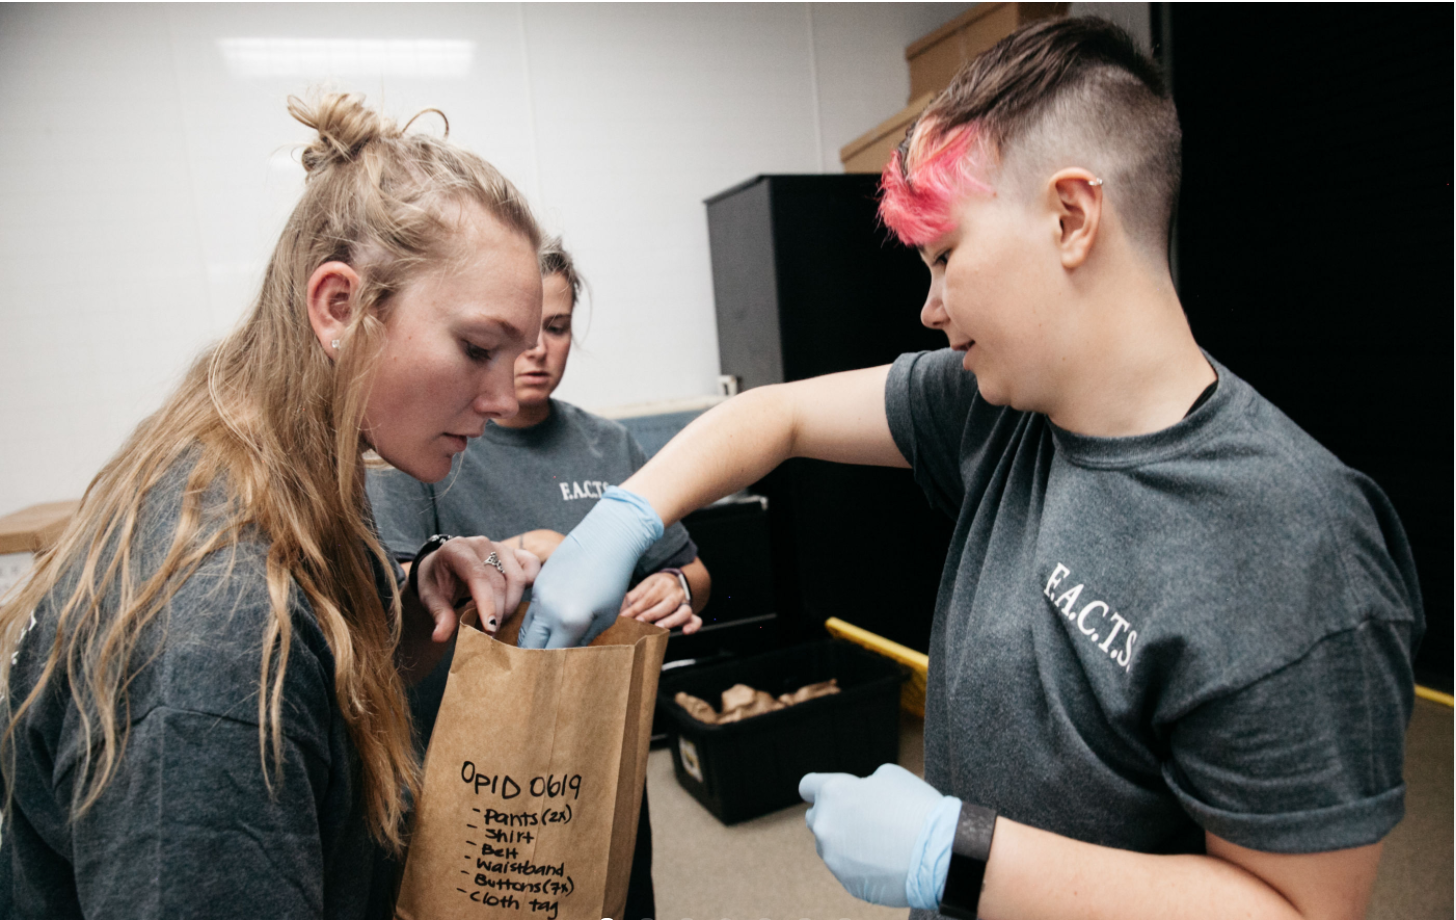 Anthropology seniors Cari Helgeson and Shelly White store migrant remains at the Forensic Anthropology Center at Texas State University in San Marcos. The team goes through a rigorous documentation and organization process to catalog, clean  and store the items by case numbers. Image by Julysa Sosa. United States, 2017.